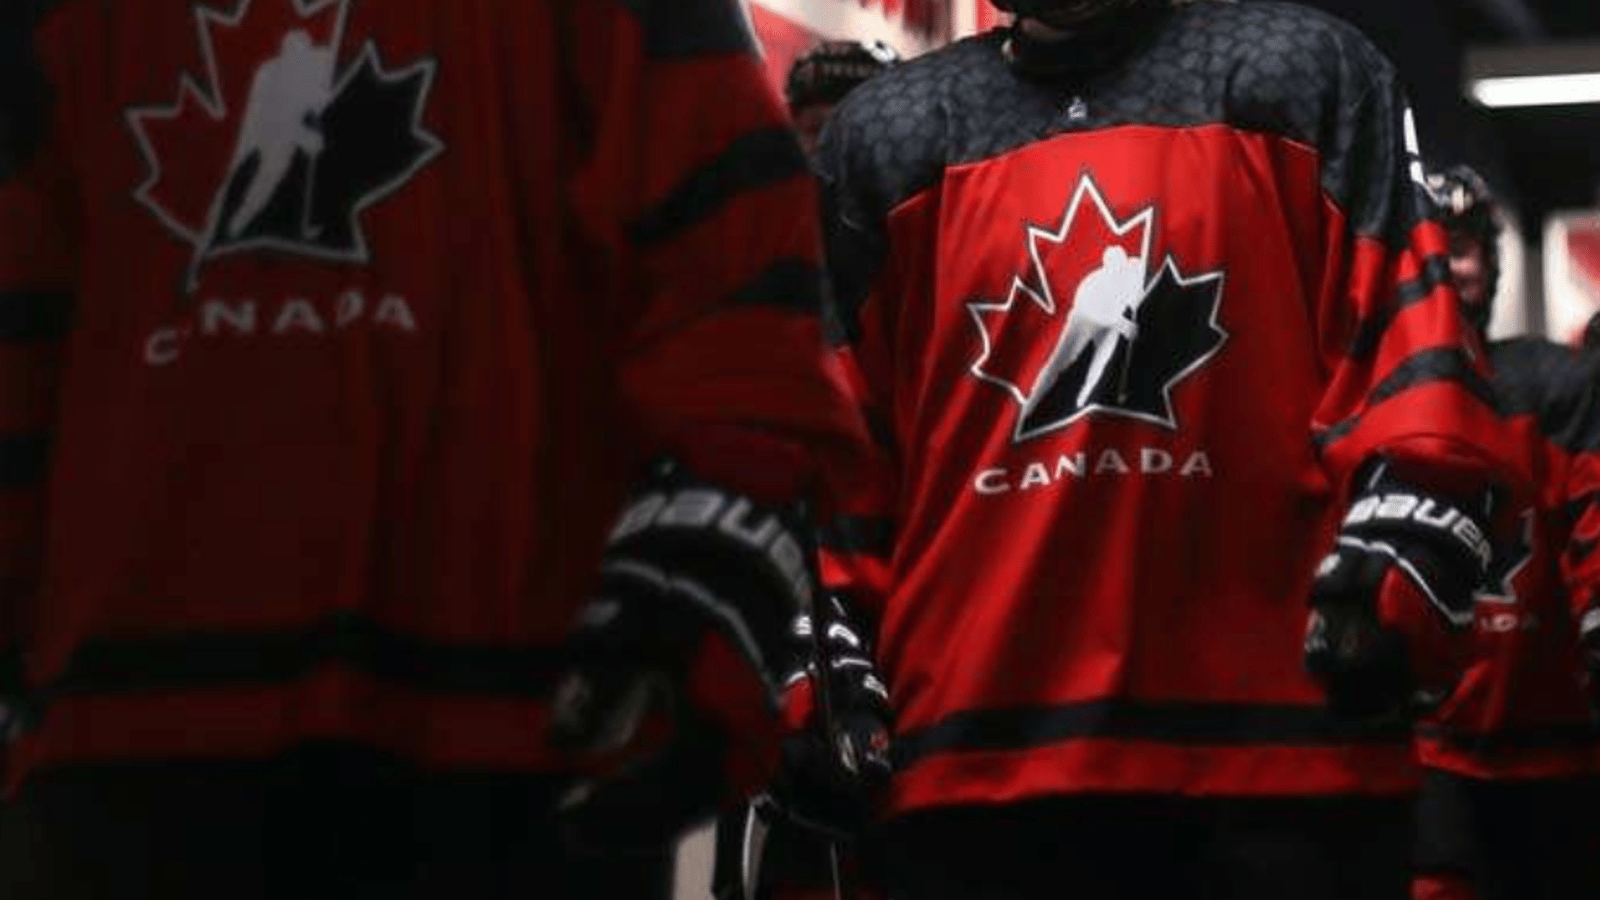 More blows to Hockey Canada and they better keep coming!